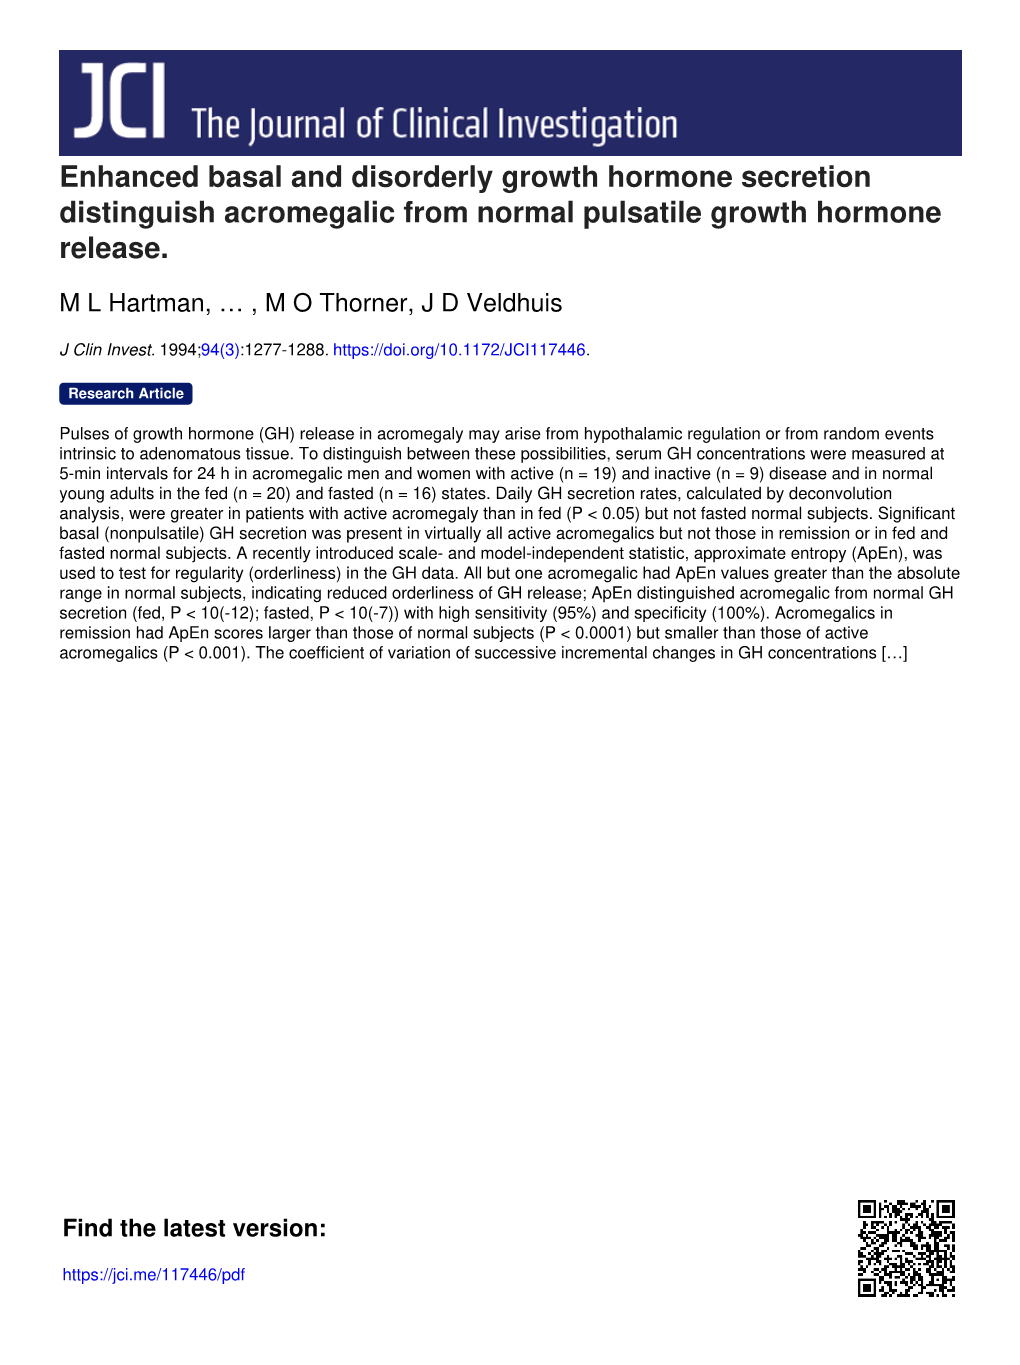 Enhanced Basal and Disorderly Growth Hormone Secretion Distinguish Acromegalic from Normal Pulsatile Growth Hormone Release